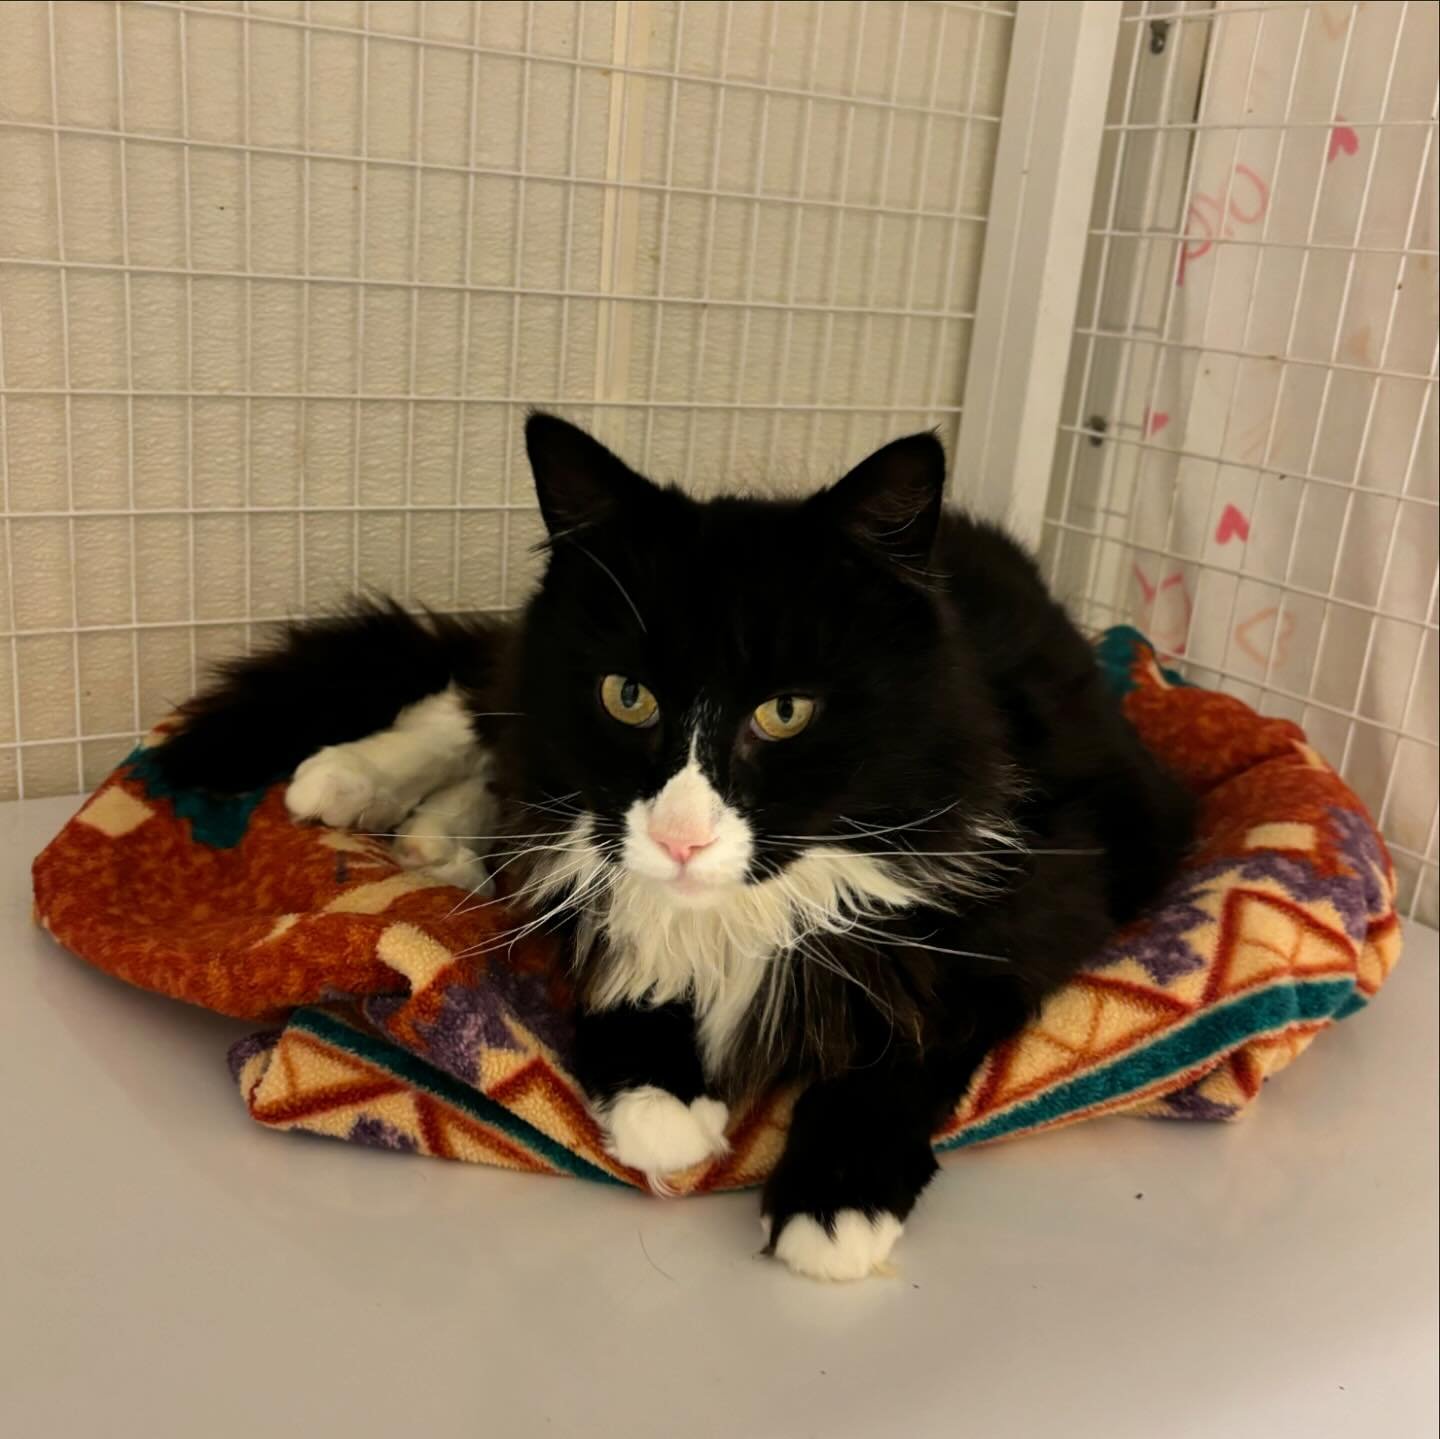 Meet Alanine, the 8 year old cuddly charmer available to adopt! This big boy adores attention and will purr up a storm the moment he receives some chin scratches. Alanine is content to chill by himself but thrives on human affection. With his super f